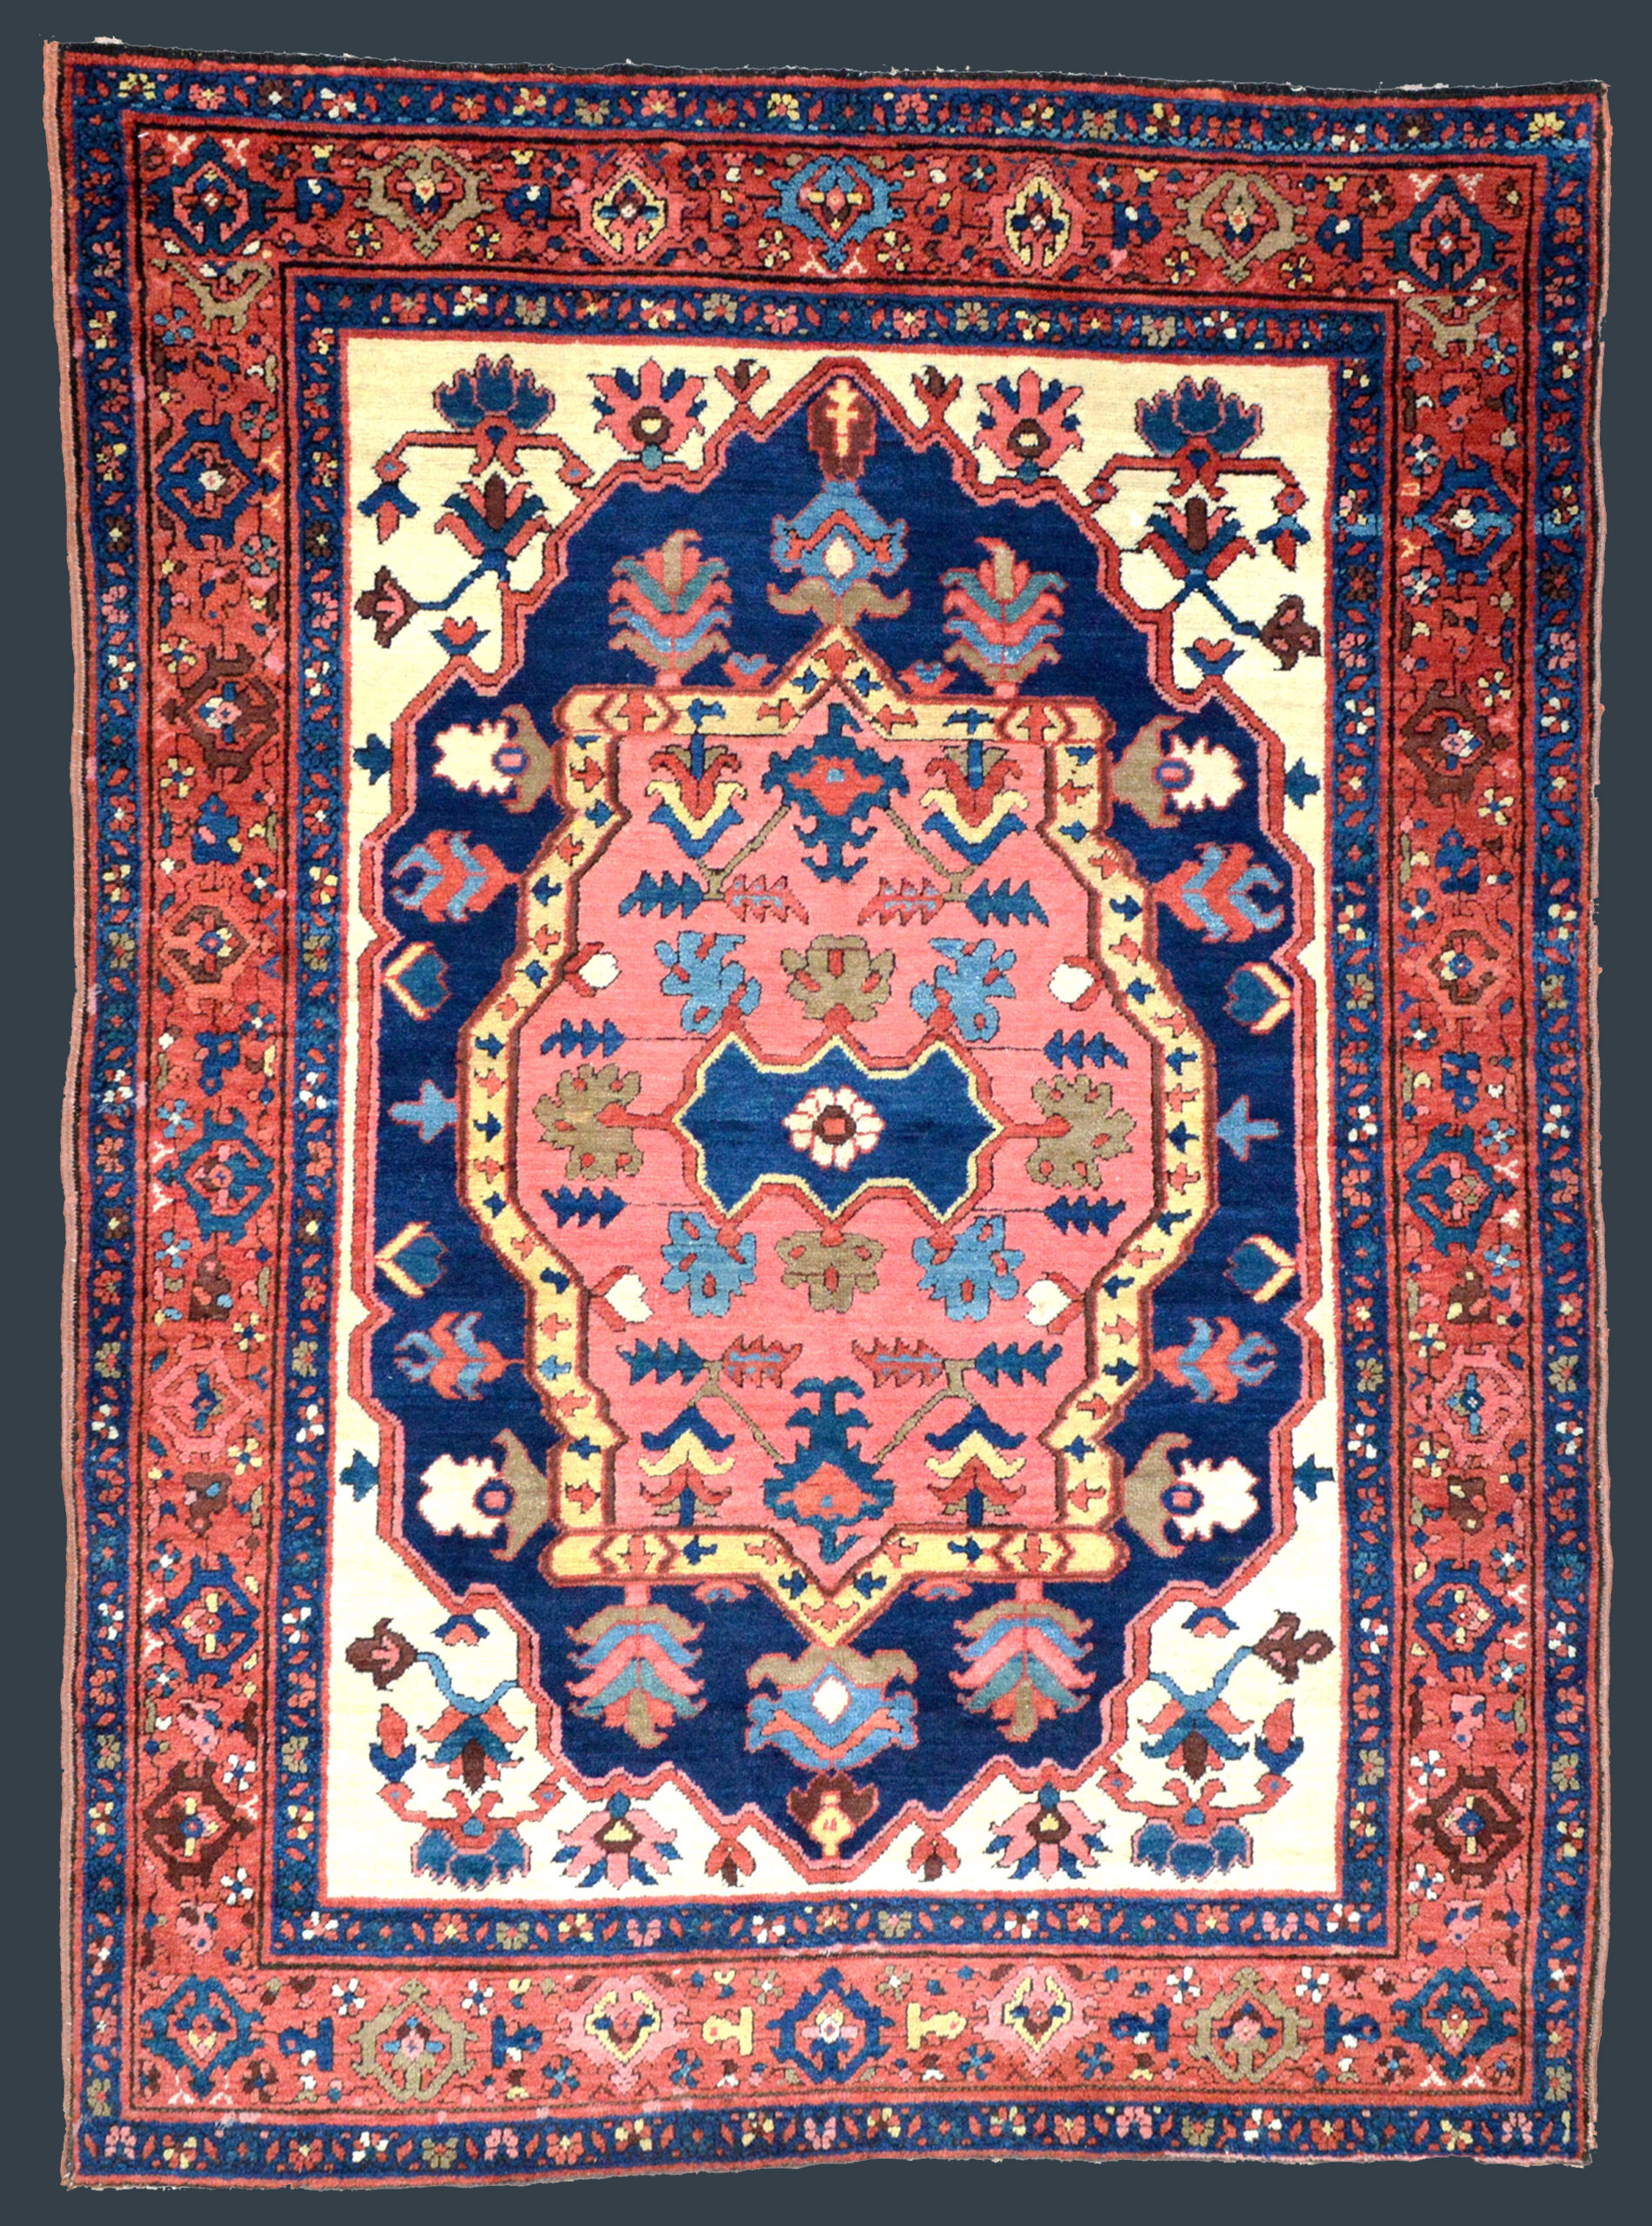 4.5 x 6 Antique Bakshaish rug with a coral medallion on a navy field that is framed by ivory spandrels and a brick red border